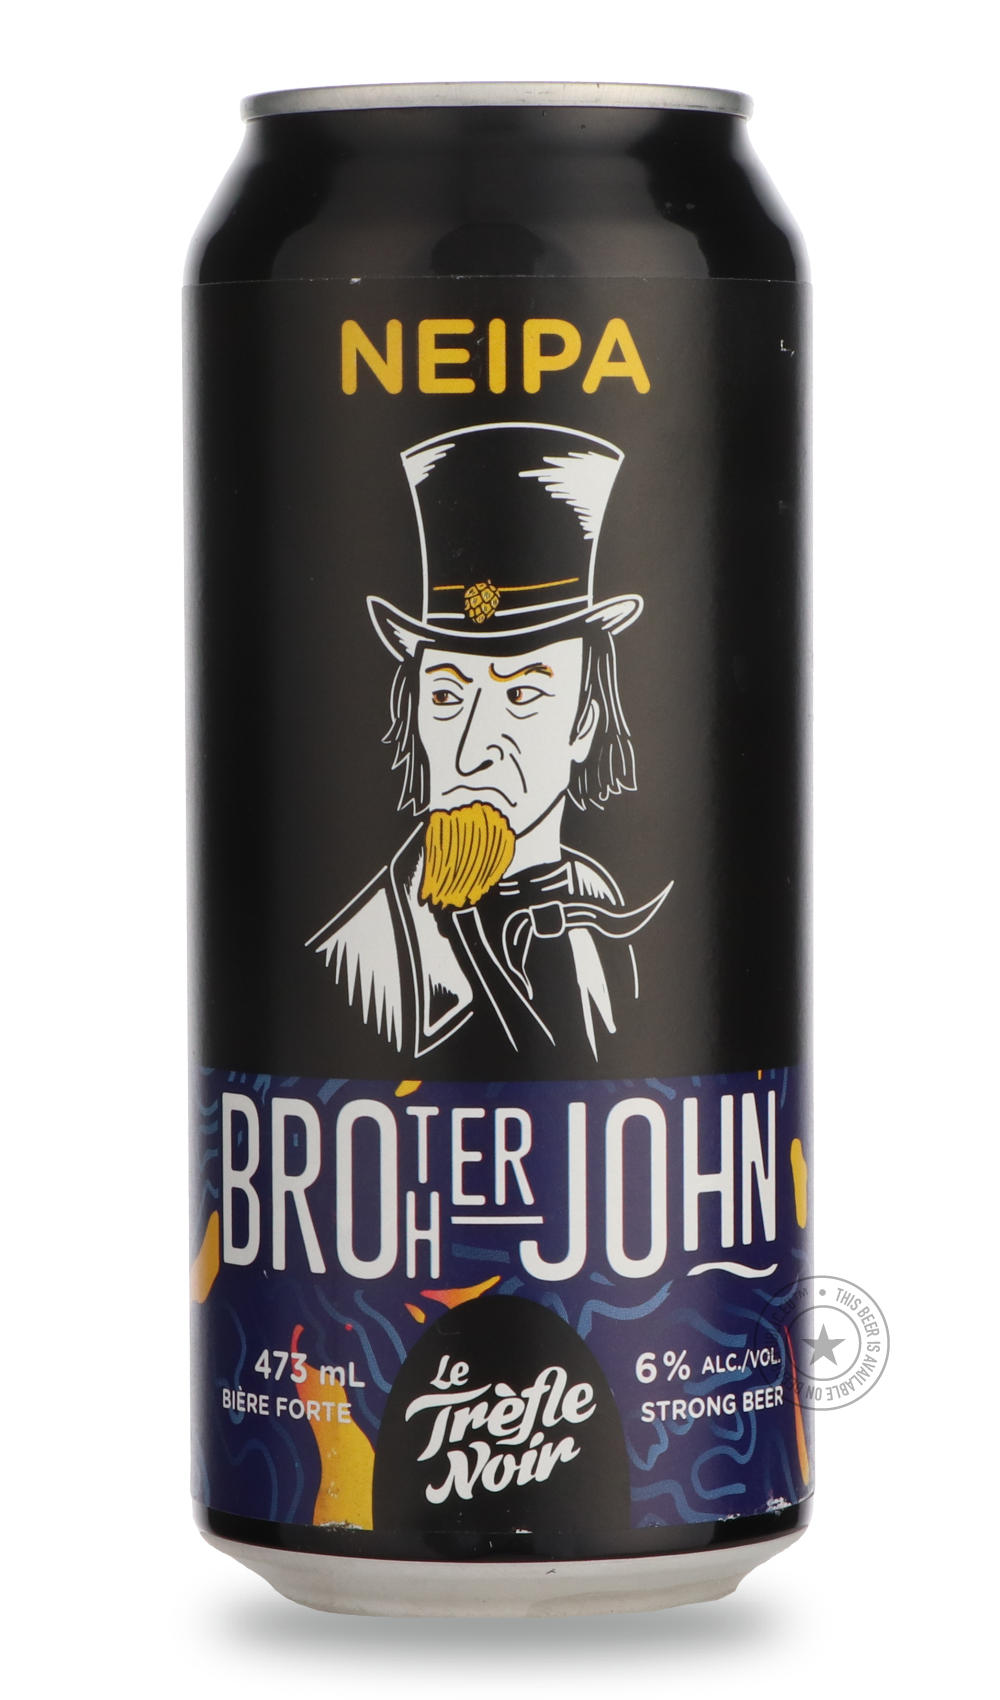 -Le Tréfle Noir- Brother John-IPA- Only @ Beer Republic - The best online beer store for American & Canadian craft beer - Buy beer online from the USA and Canada - Bier online kopen - Amerikaans bier kopen - Craft beer store - Craft beer kopen - Amerikanisch bier kaufen - Bier online kaufen - Acheter biere online - IPA - Stout - Porter - New England IPA - Hazy IPA - Imperial Stout - Barrel Aged - Barrel Aged Imperial Stout - Brown - Dark beer - Blond - Blonde - Pilsner - Lager - Wheat - Weizen - Amber - Bar